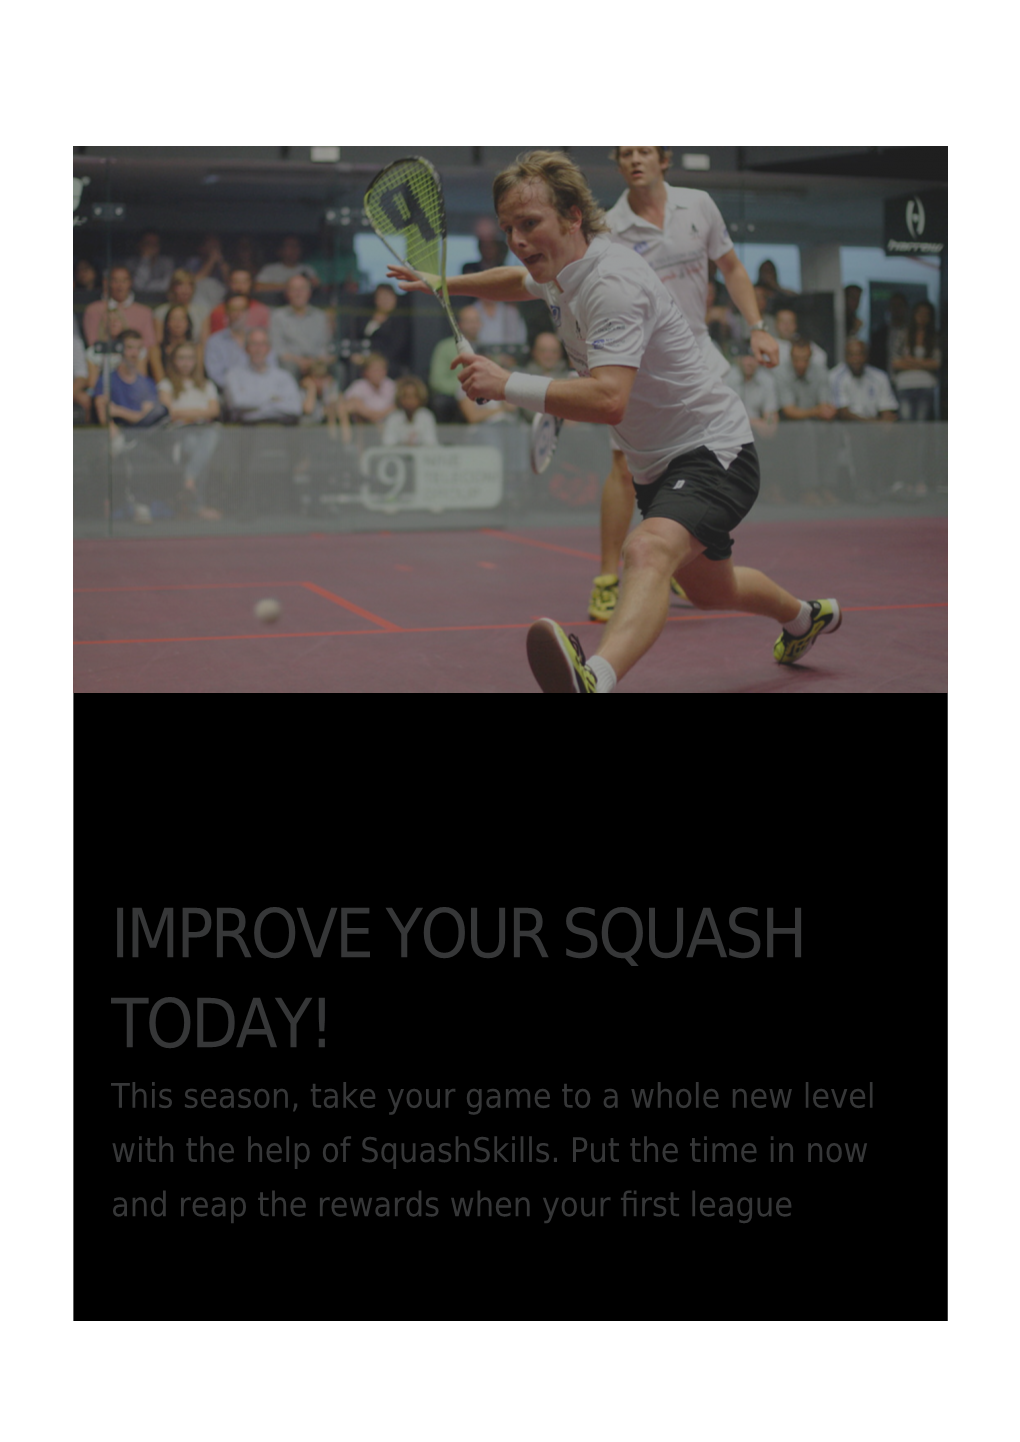 IMPROVE YOUR SQUASH TODAY! This Season, Take Your Game to a Whole New Level with the Help of Squashskills